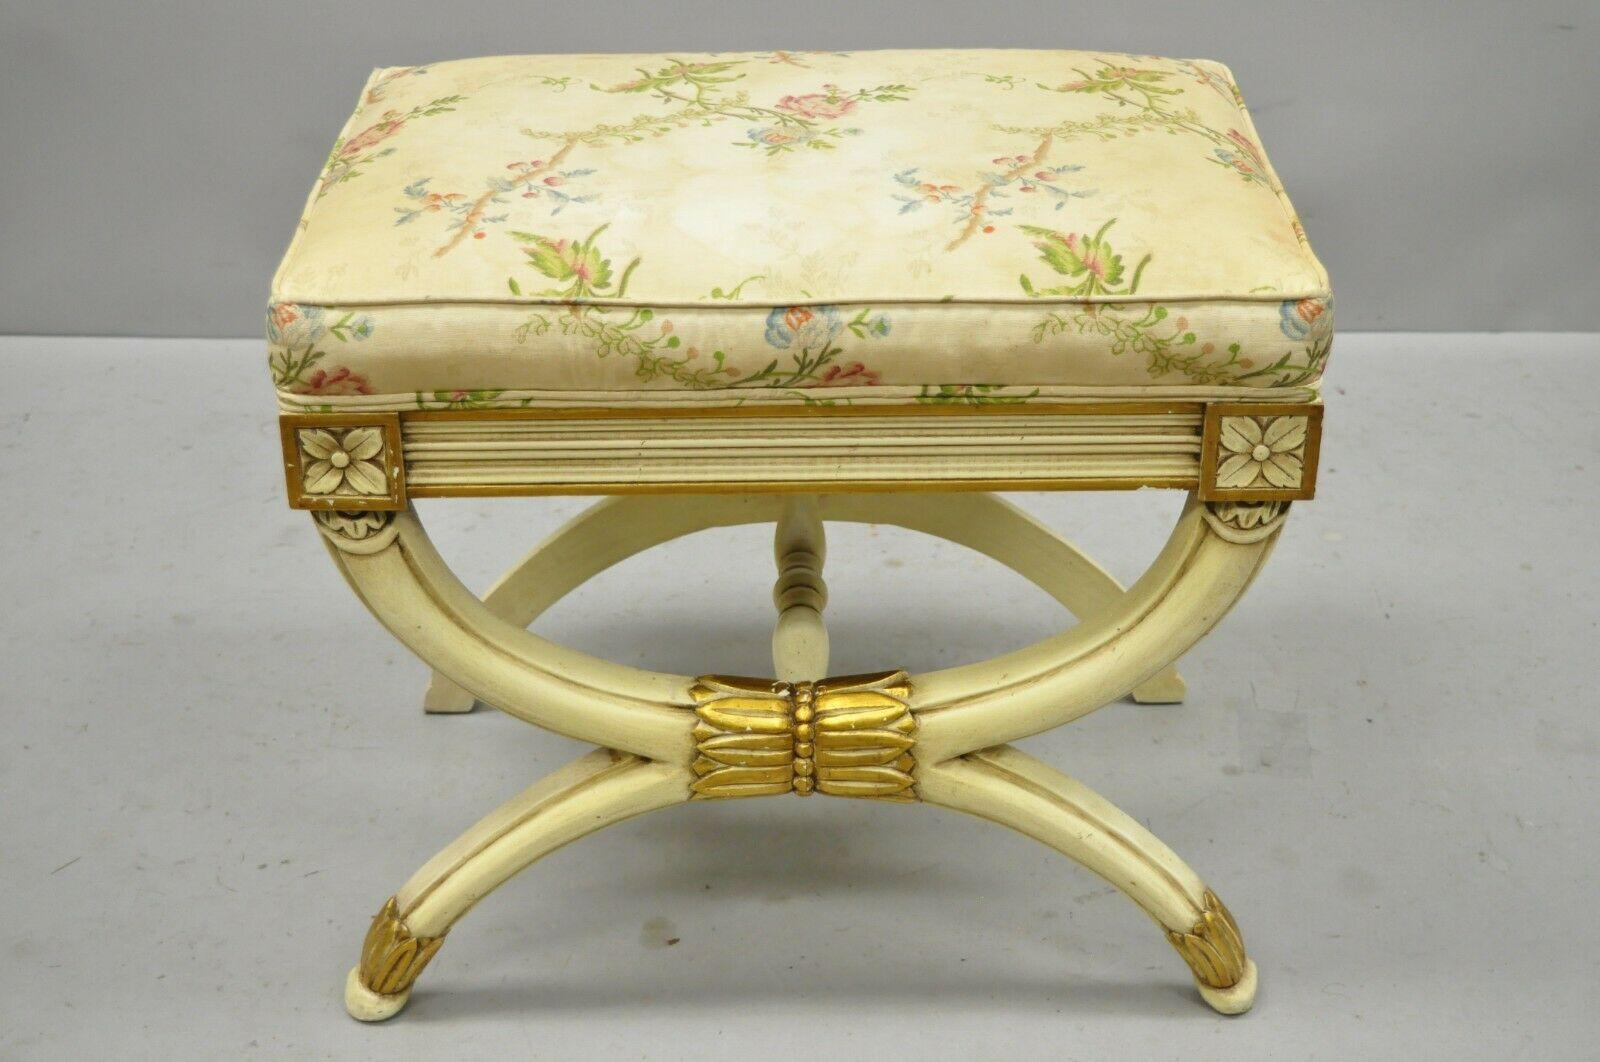 Karges X Frame French Neoclassical Regency Style Curule Bench Stool. Item features gold and cream painted finish, curule x frame base, solid wood frame, upholstered seat, original label, great style and form. Mid 20th Century. Measurements: 19.5